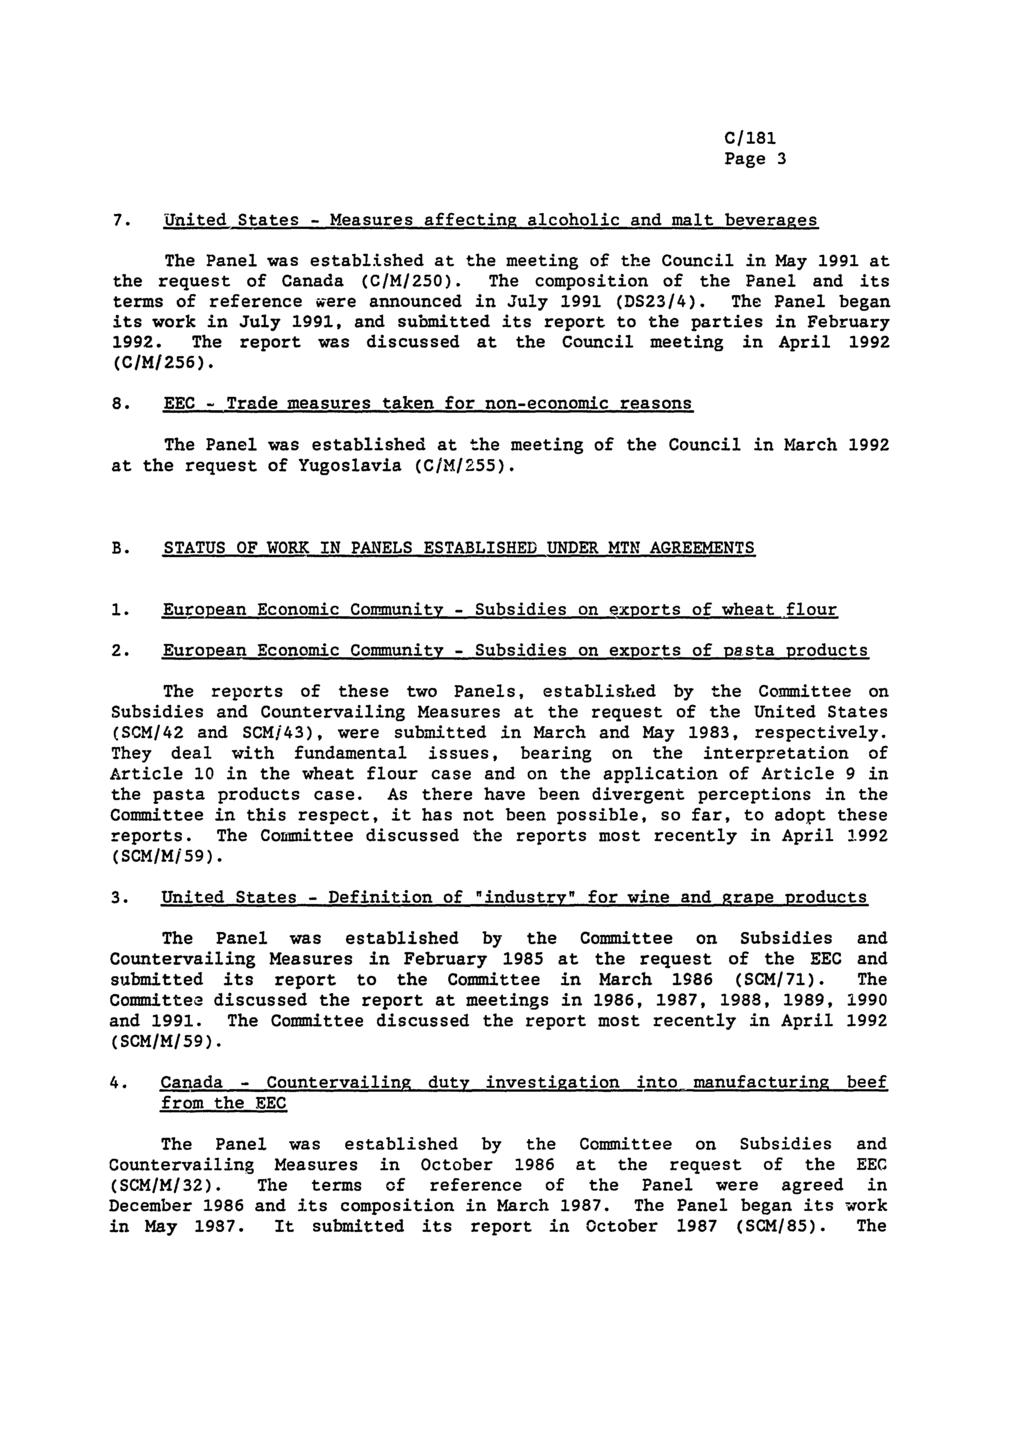 Page 3 7. United States - Measures affecting alcoholic and malt beverages The Panel was established at the meeting of the Council in May 1991 at the request of Canada (C/M/250).